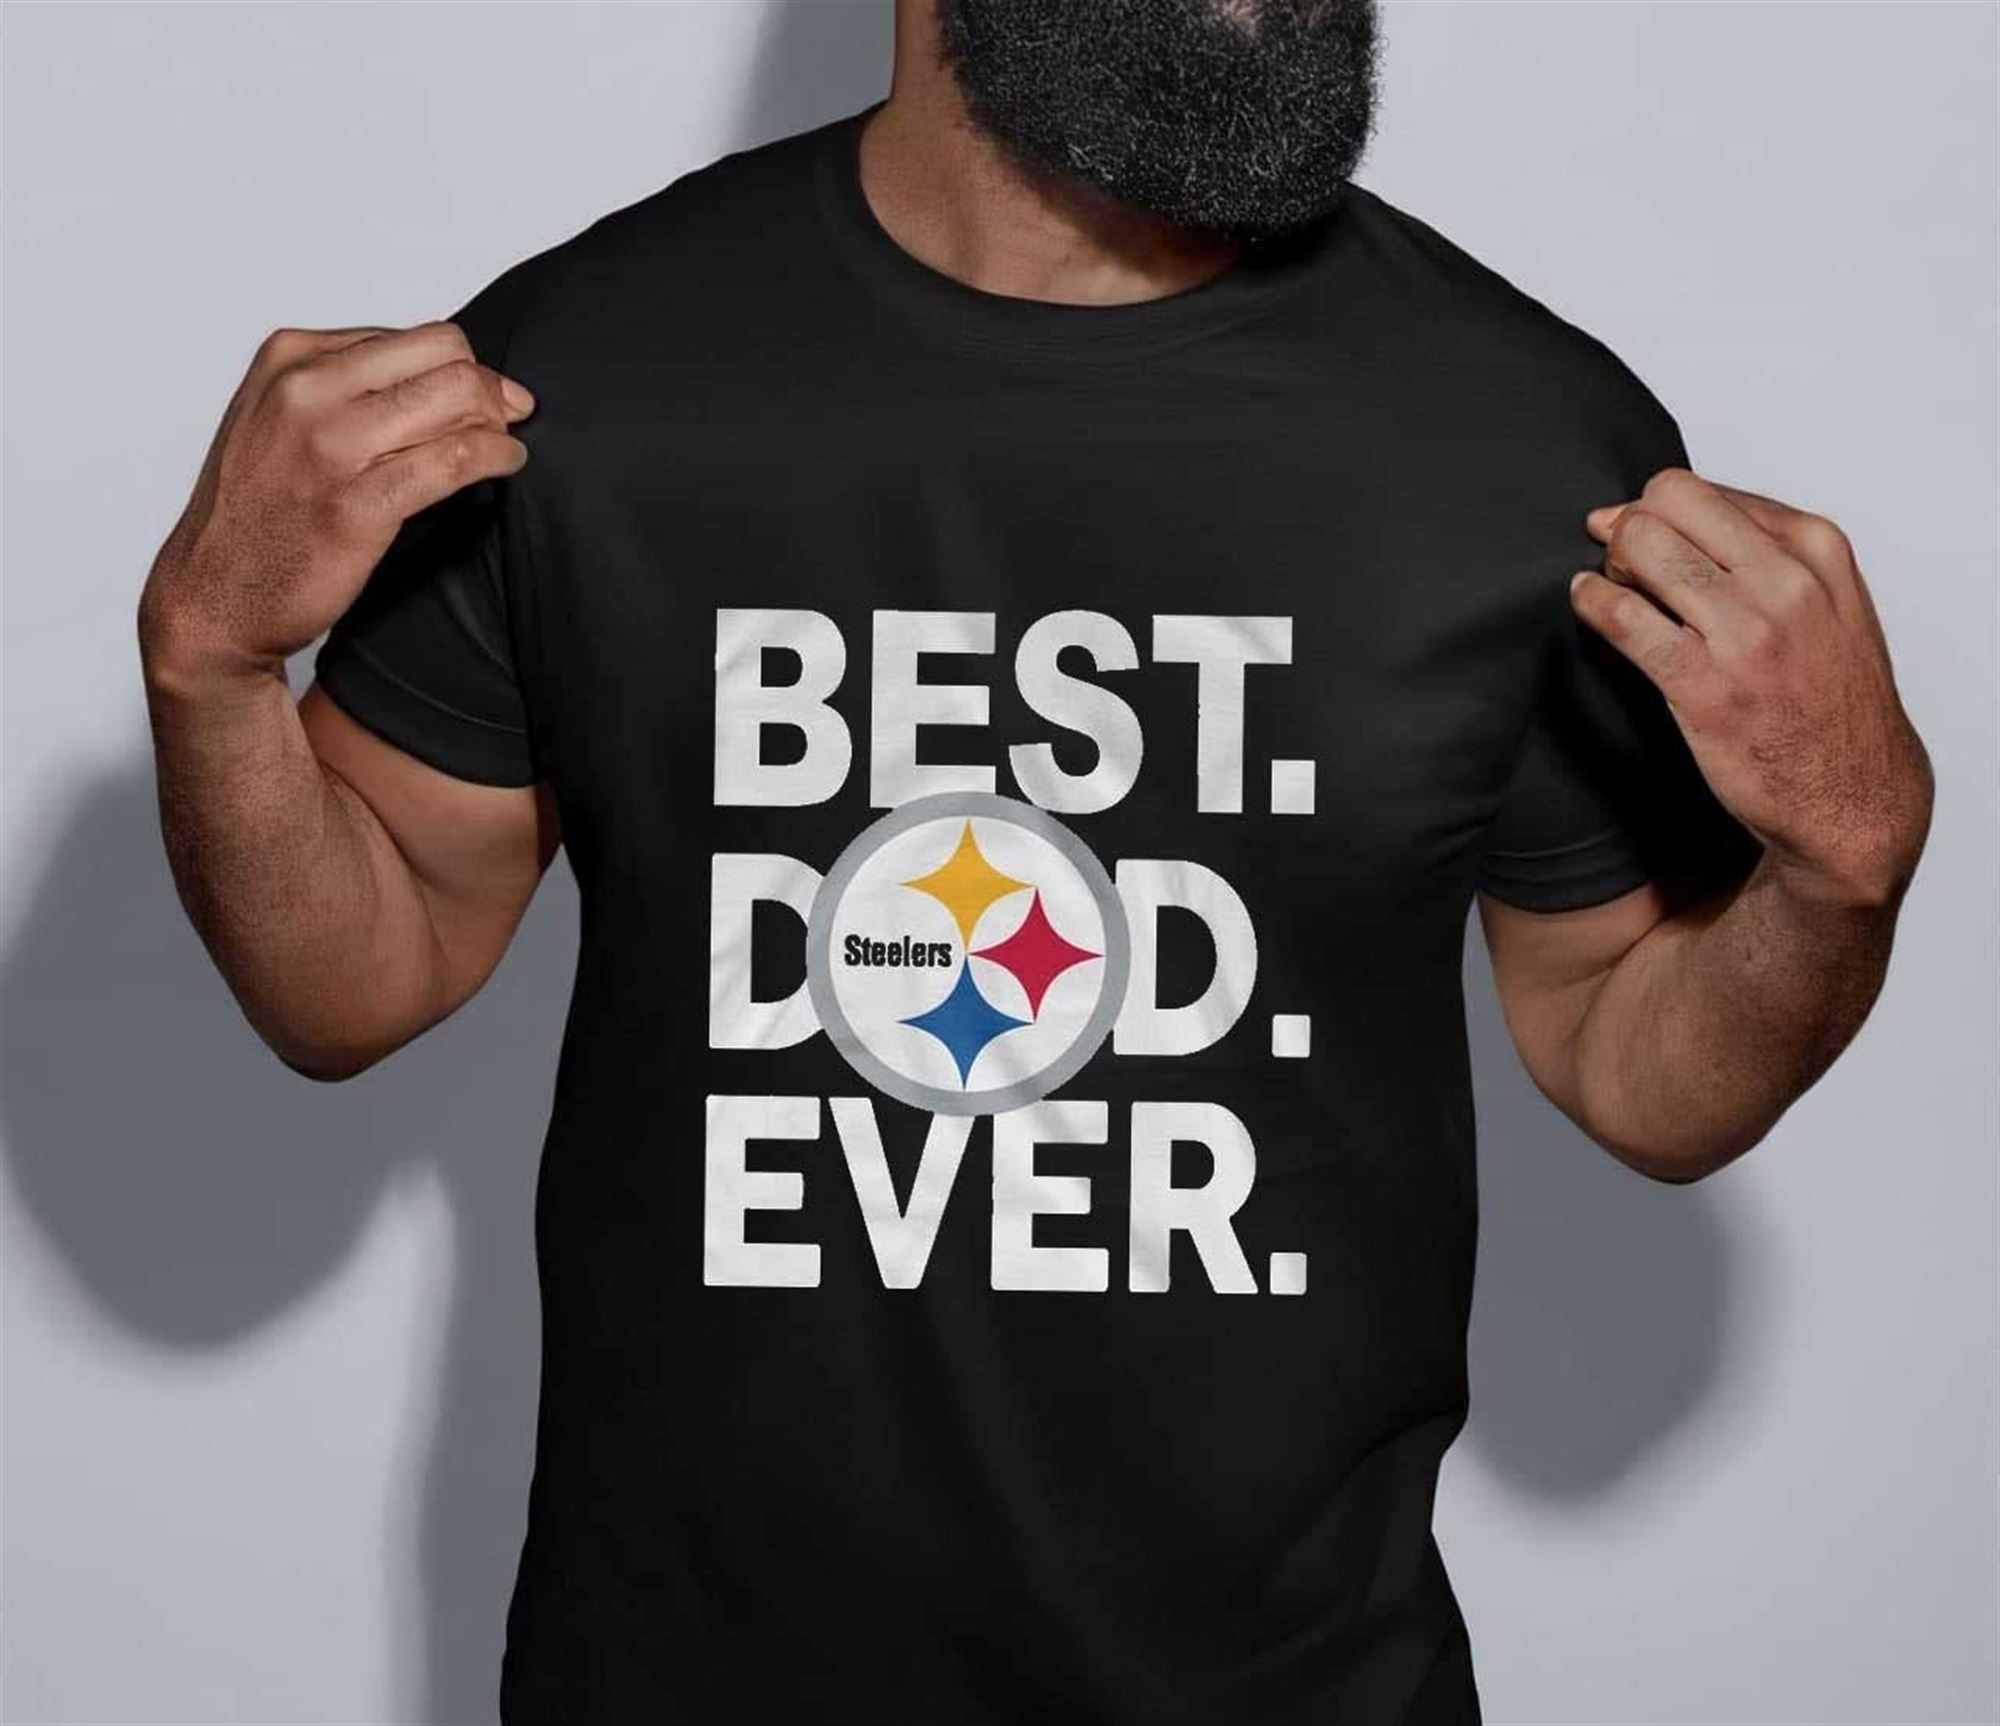 Best Dad Ever Shirt Pittsburgh Steelers Football Team Gift For Dad NFL Shirt Sport Shirt Fathers Day Gift Gift For Father Ha-c20-5